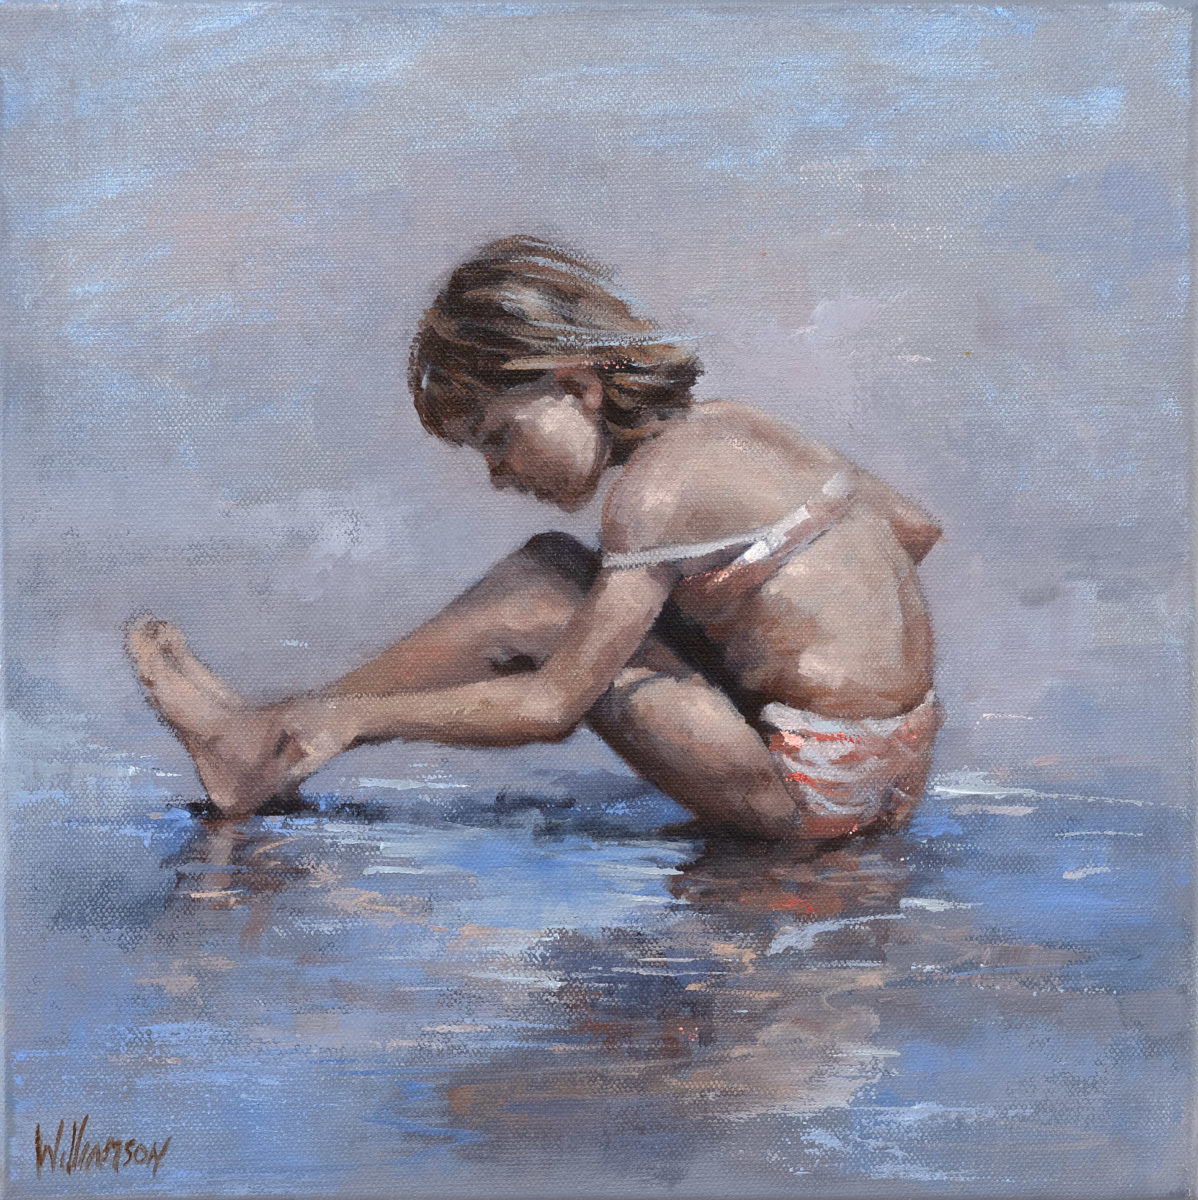 On the sand | Jan Williamson | oil on canvas | 30 x 30 cm | SOLD